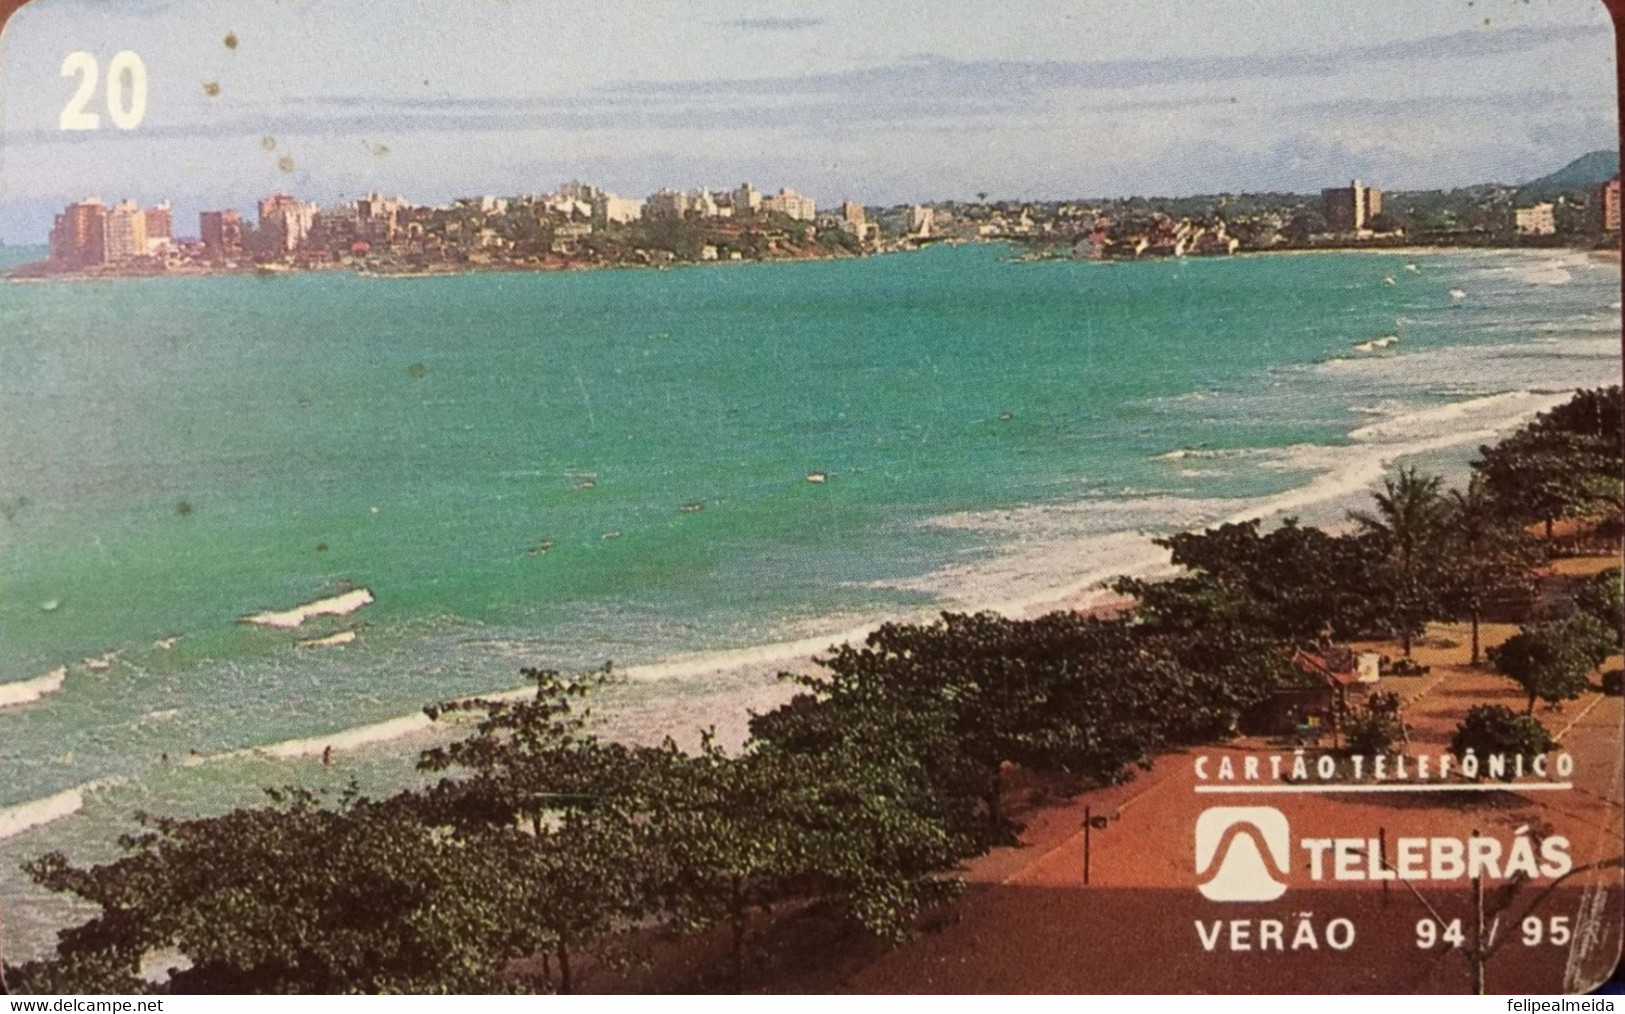 Rare 26 Years Old Phone Card Manufactured By Telebras In 1995 - Series Summer 1994 - 1995 Photo Praia Do Morro - Guarapa - Ontwikkeling